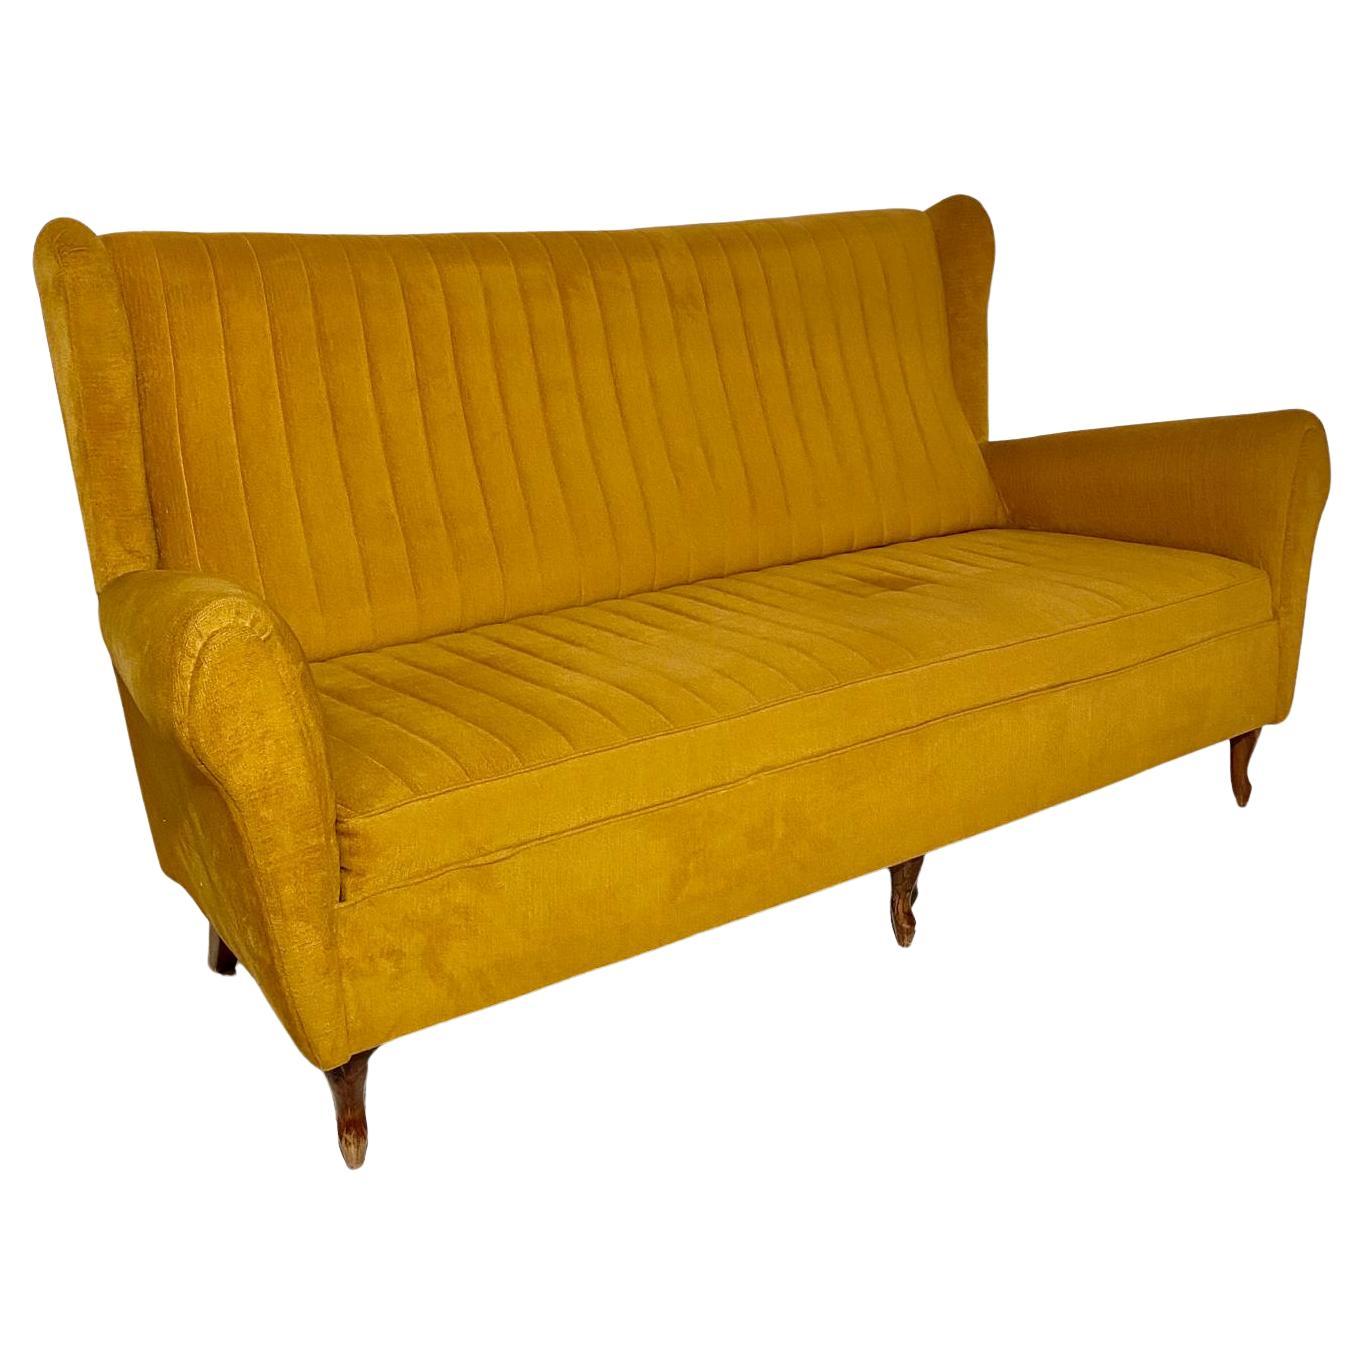 A beautiful and unique mustard-colored Gio Ponti style living room set from the 1950s. Original fabric and curved wooden legs. The set consists of an elegant three-seater high-back sofa and two high-back armchairs. Attributed to Italian design